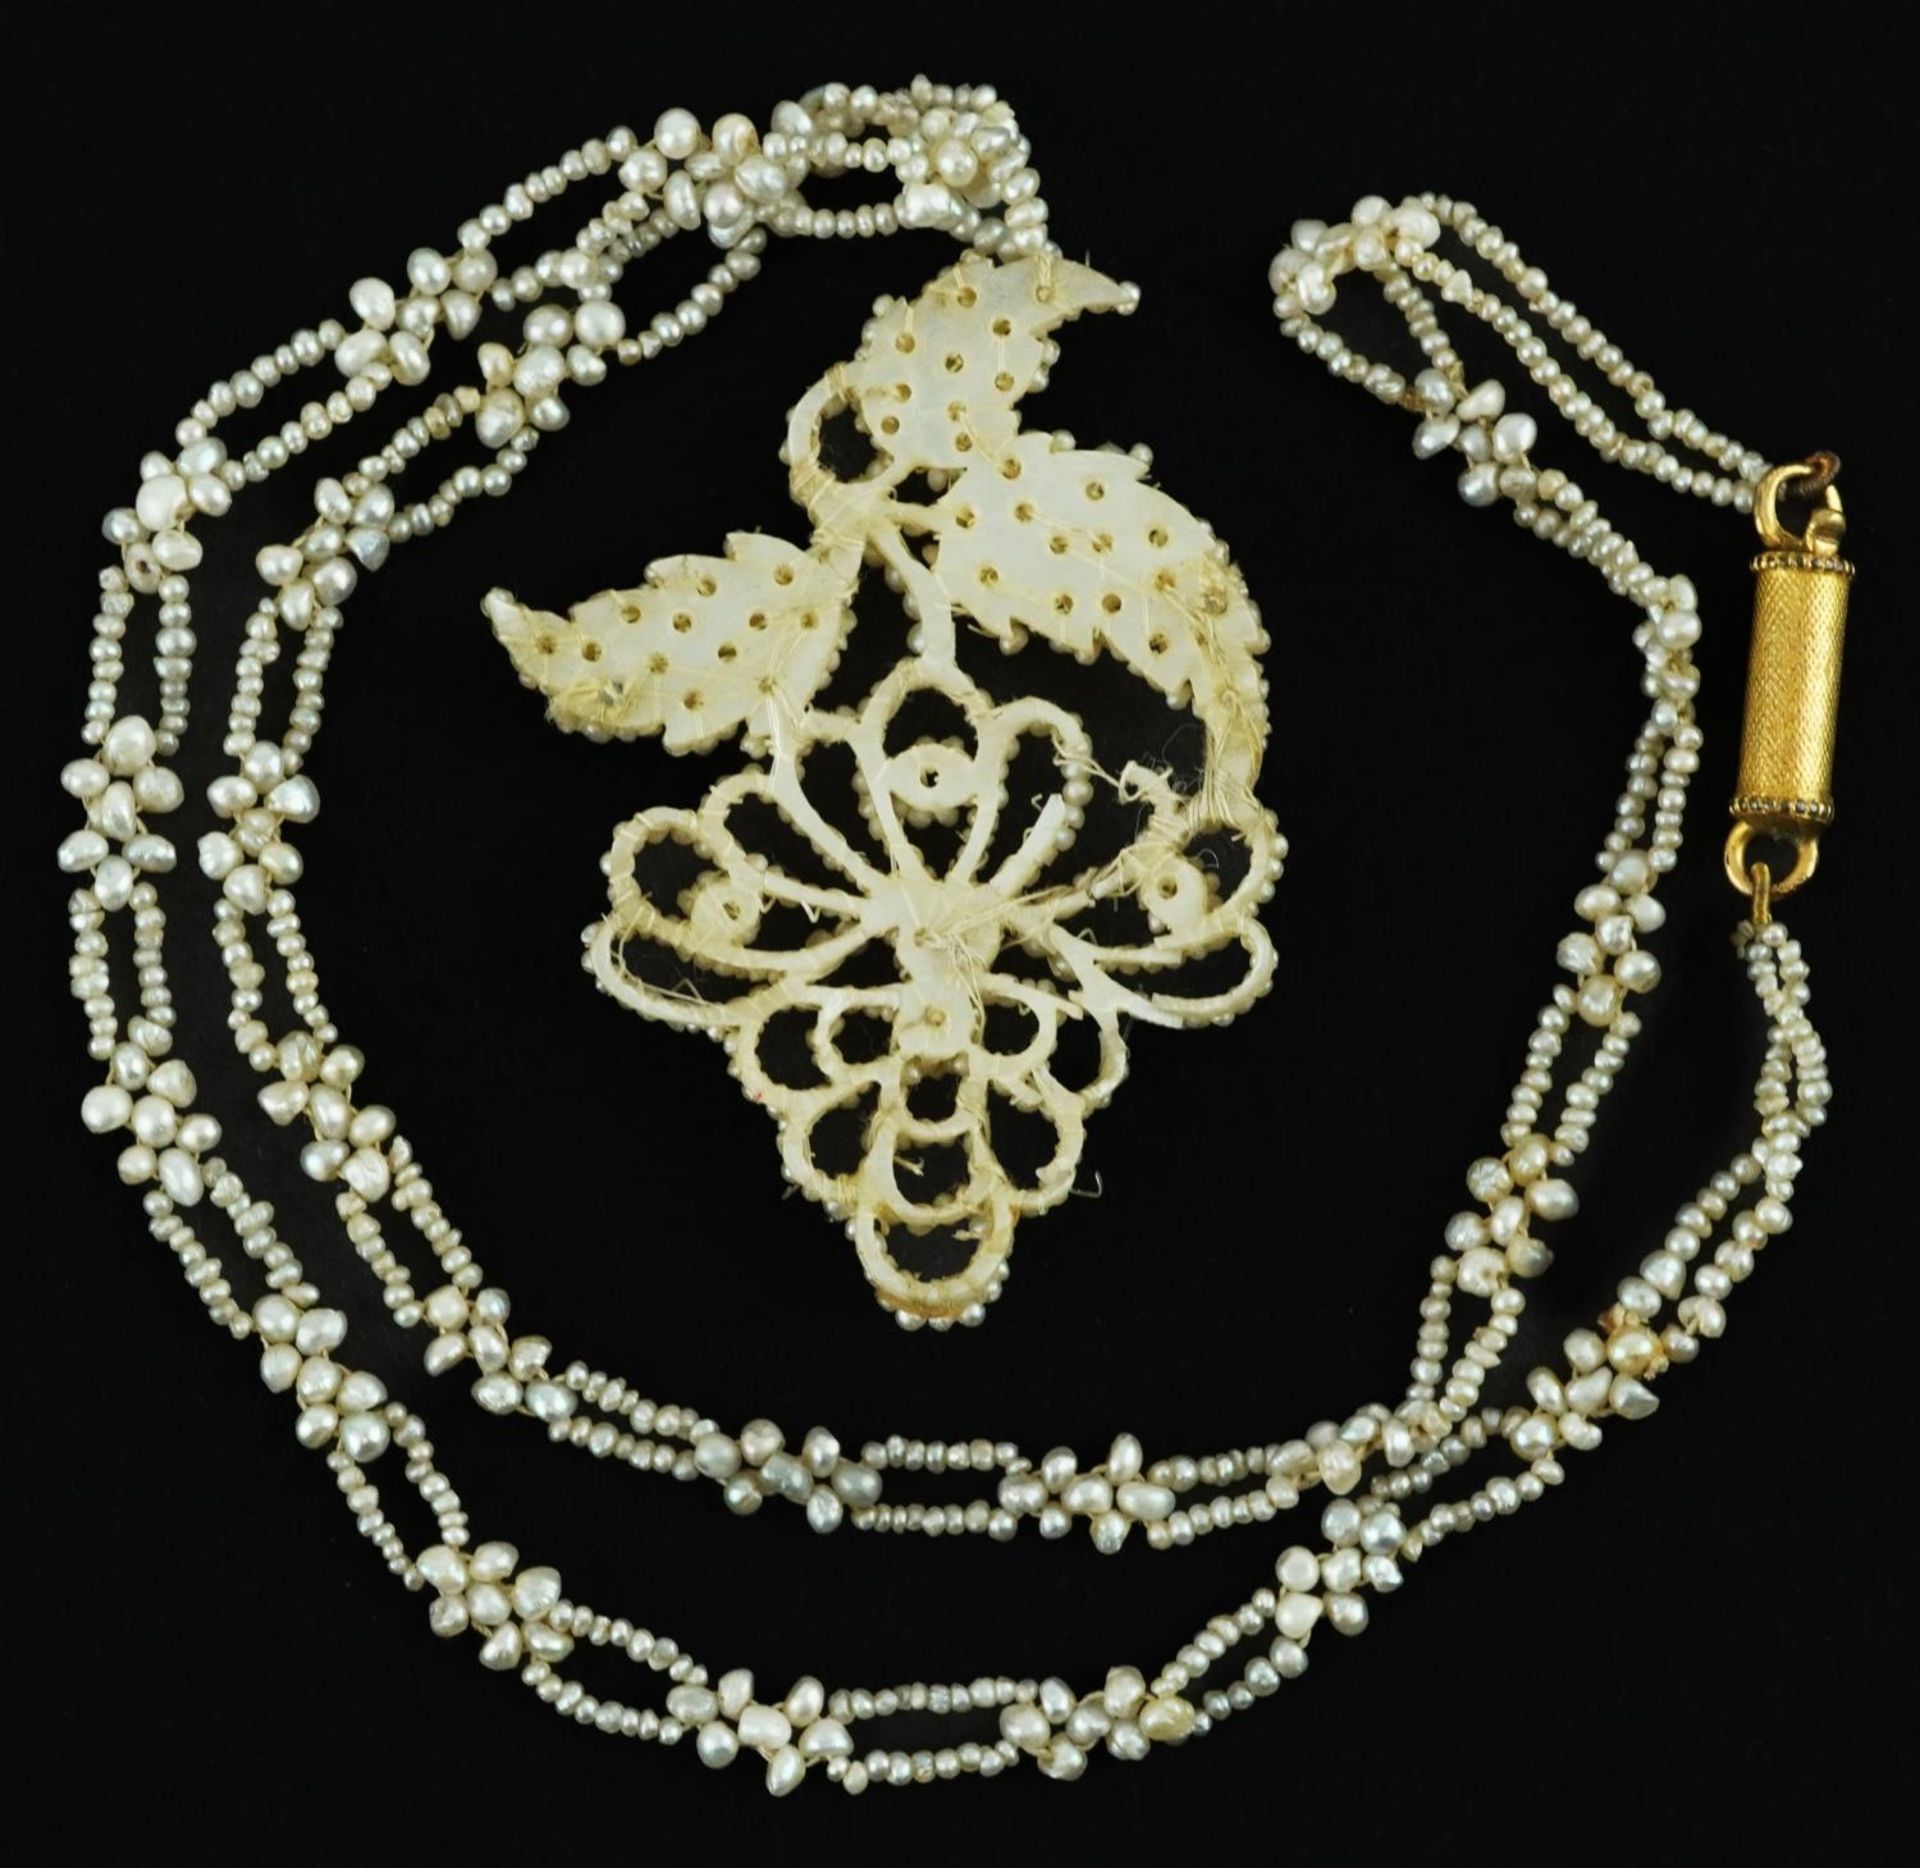 Antique pearl pendant in the form of grapes on a vine on a pearl necklace with a yellow metal barrel - Bild 3 aus 3